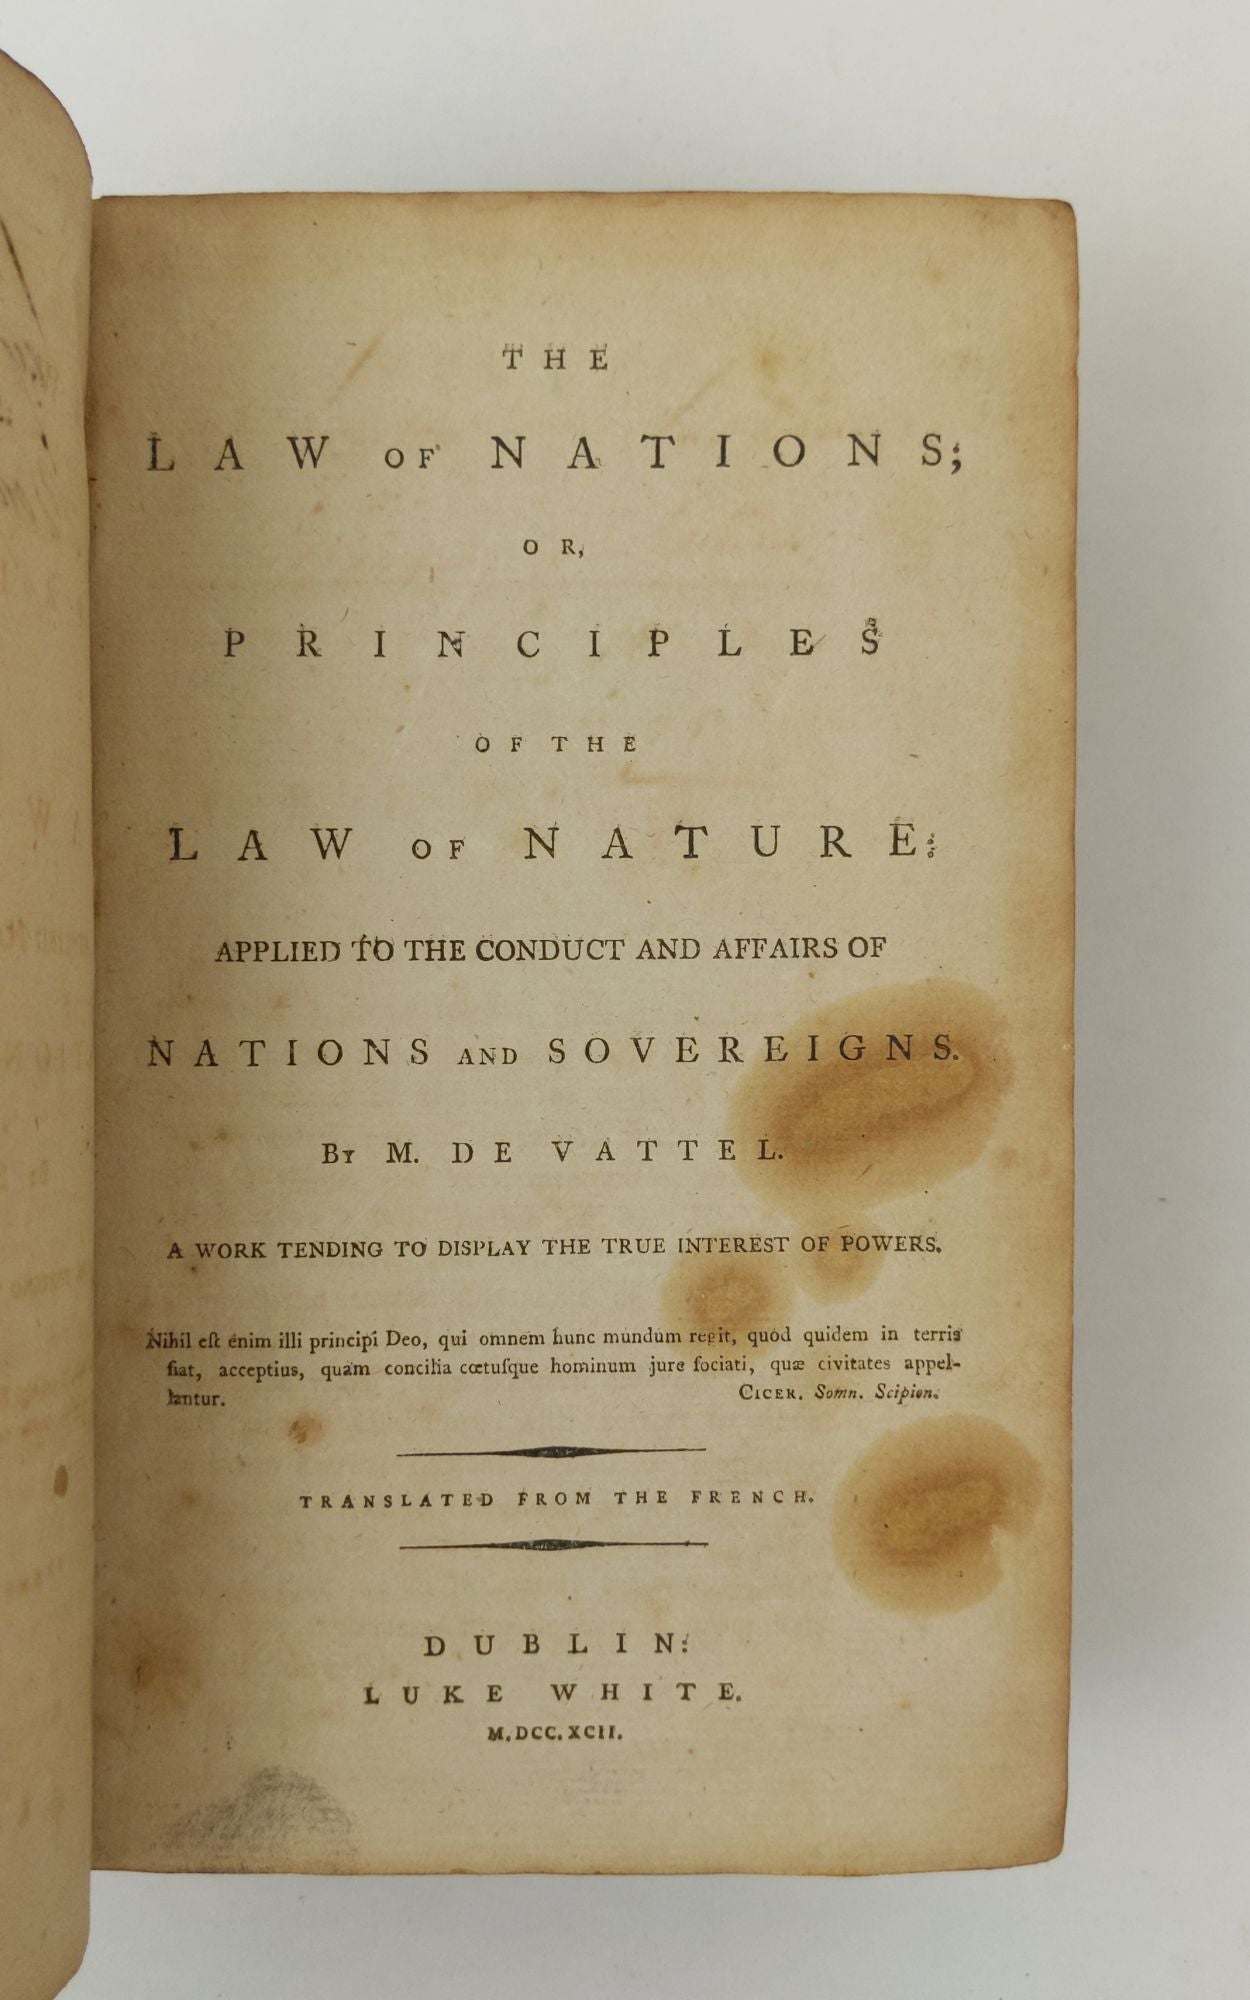 Product Image for THE LAW OF NATIONS; OR PRINCIPLES OF THE LAW OF NATURE APPLIED TO THE CONDUCT AND AFFAIRS OF NATIONS AND SOVEREIGNS